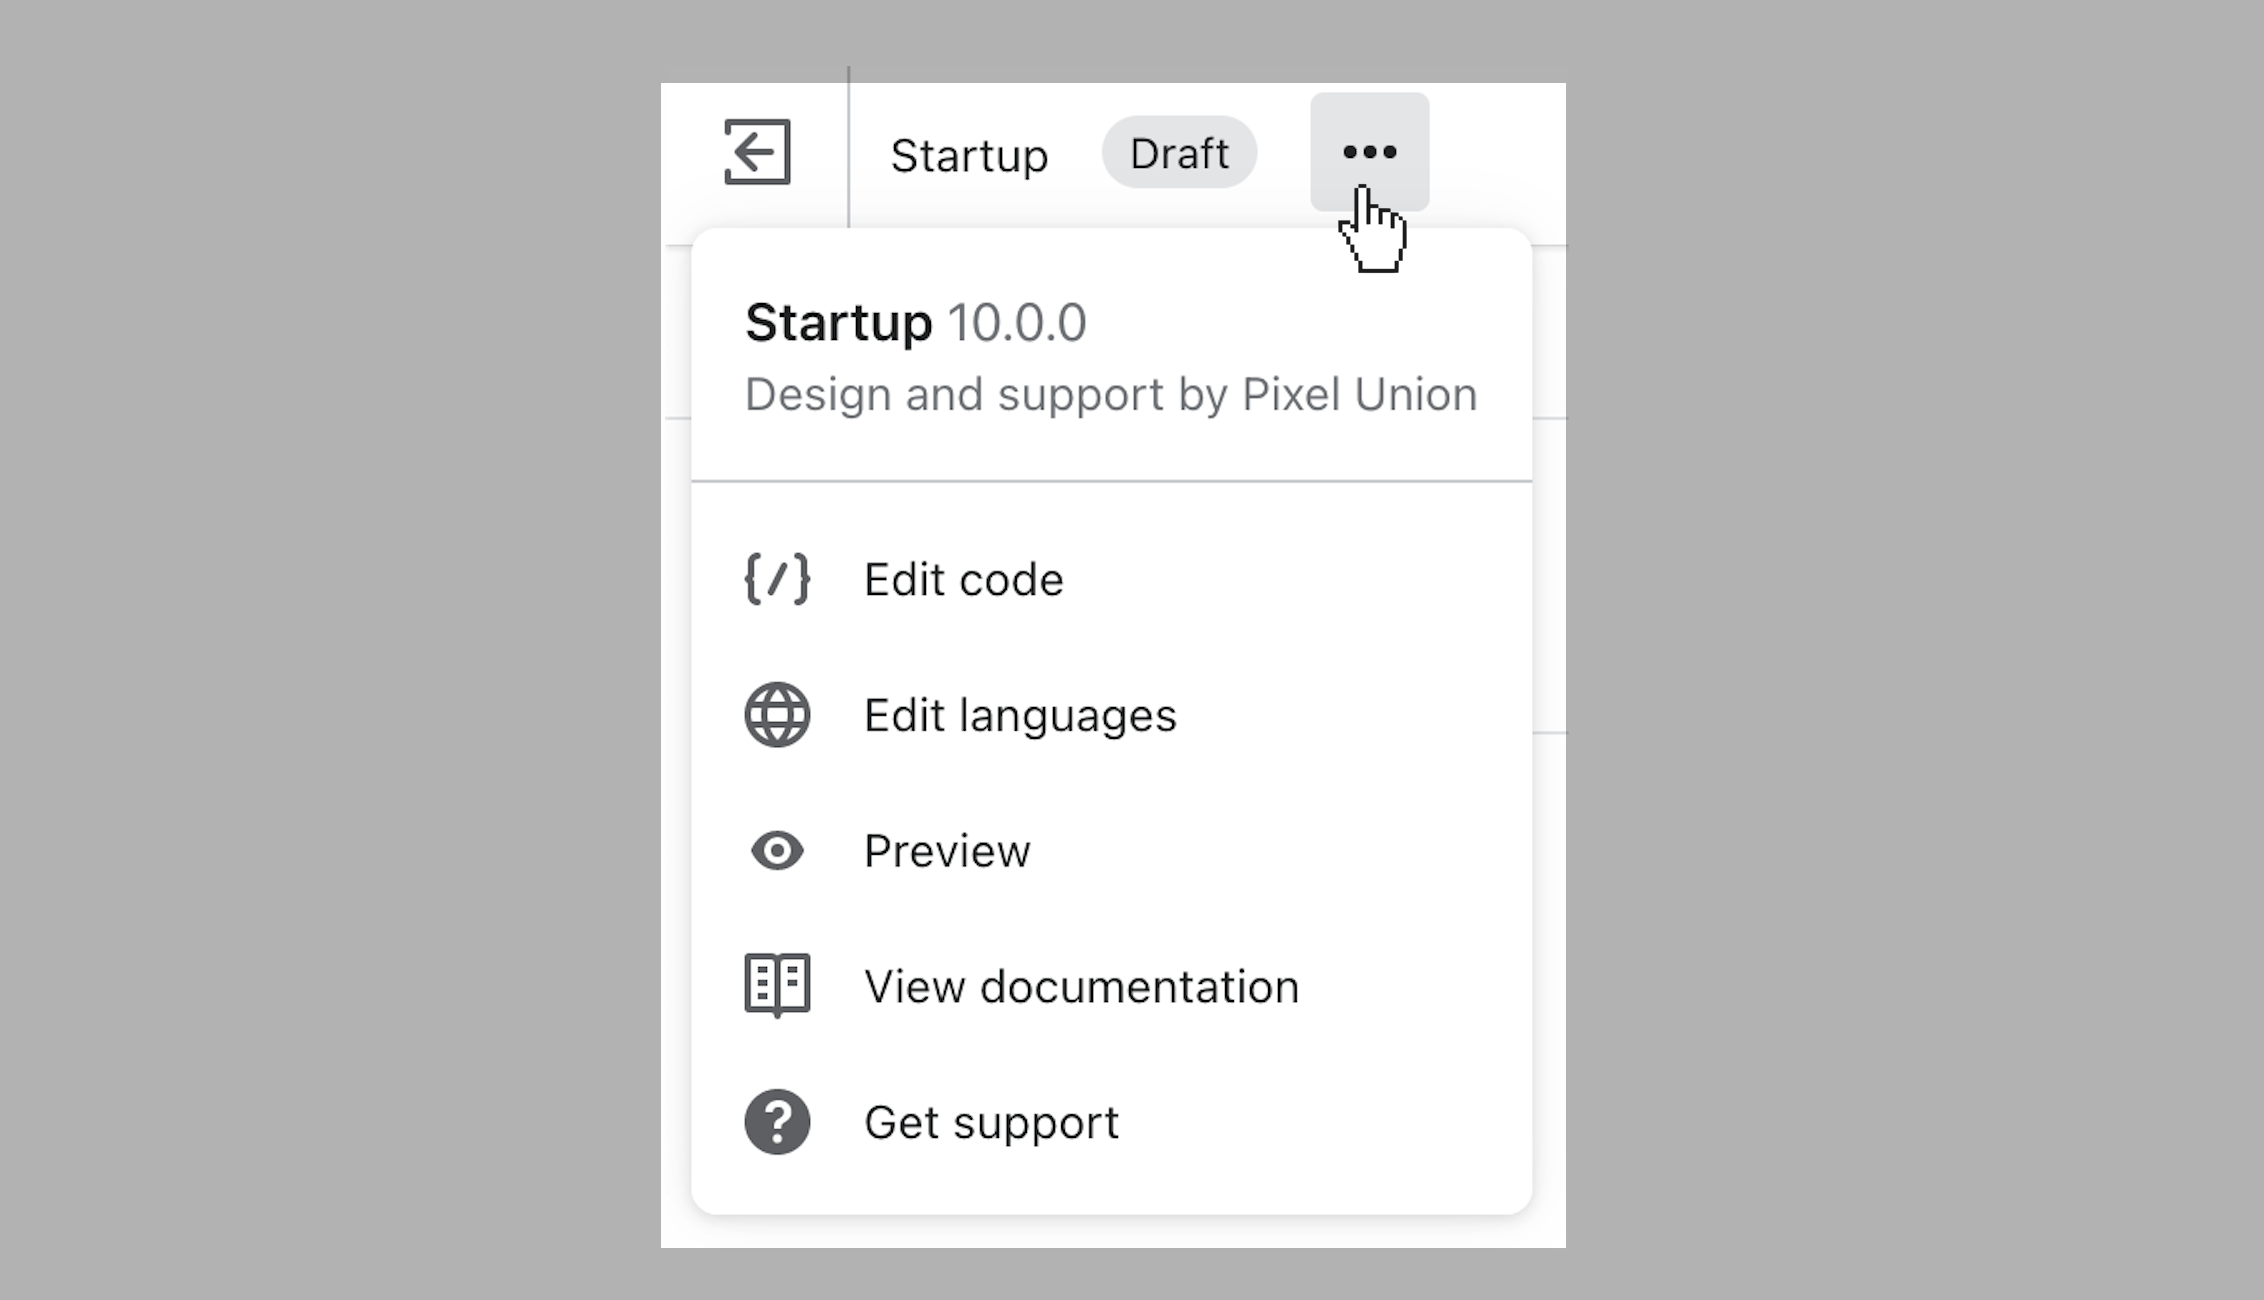 startup_theme_version_revealed_by_clicking_three_dots_theme_action_menu.png